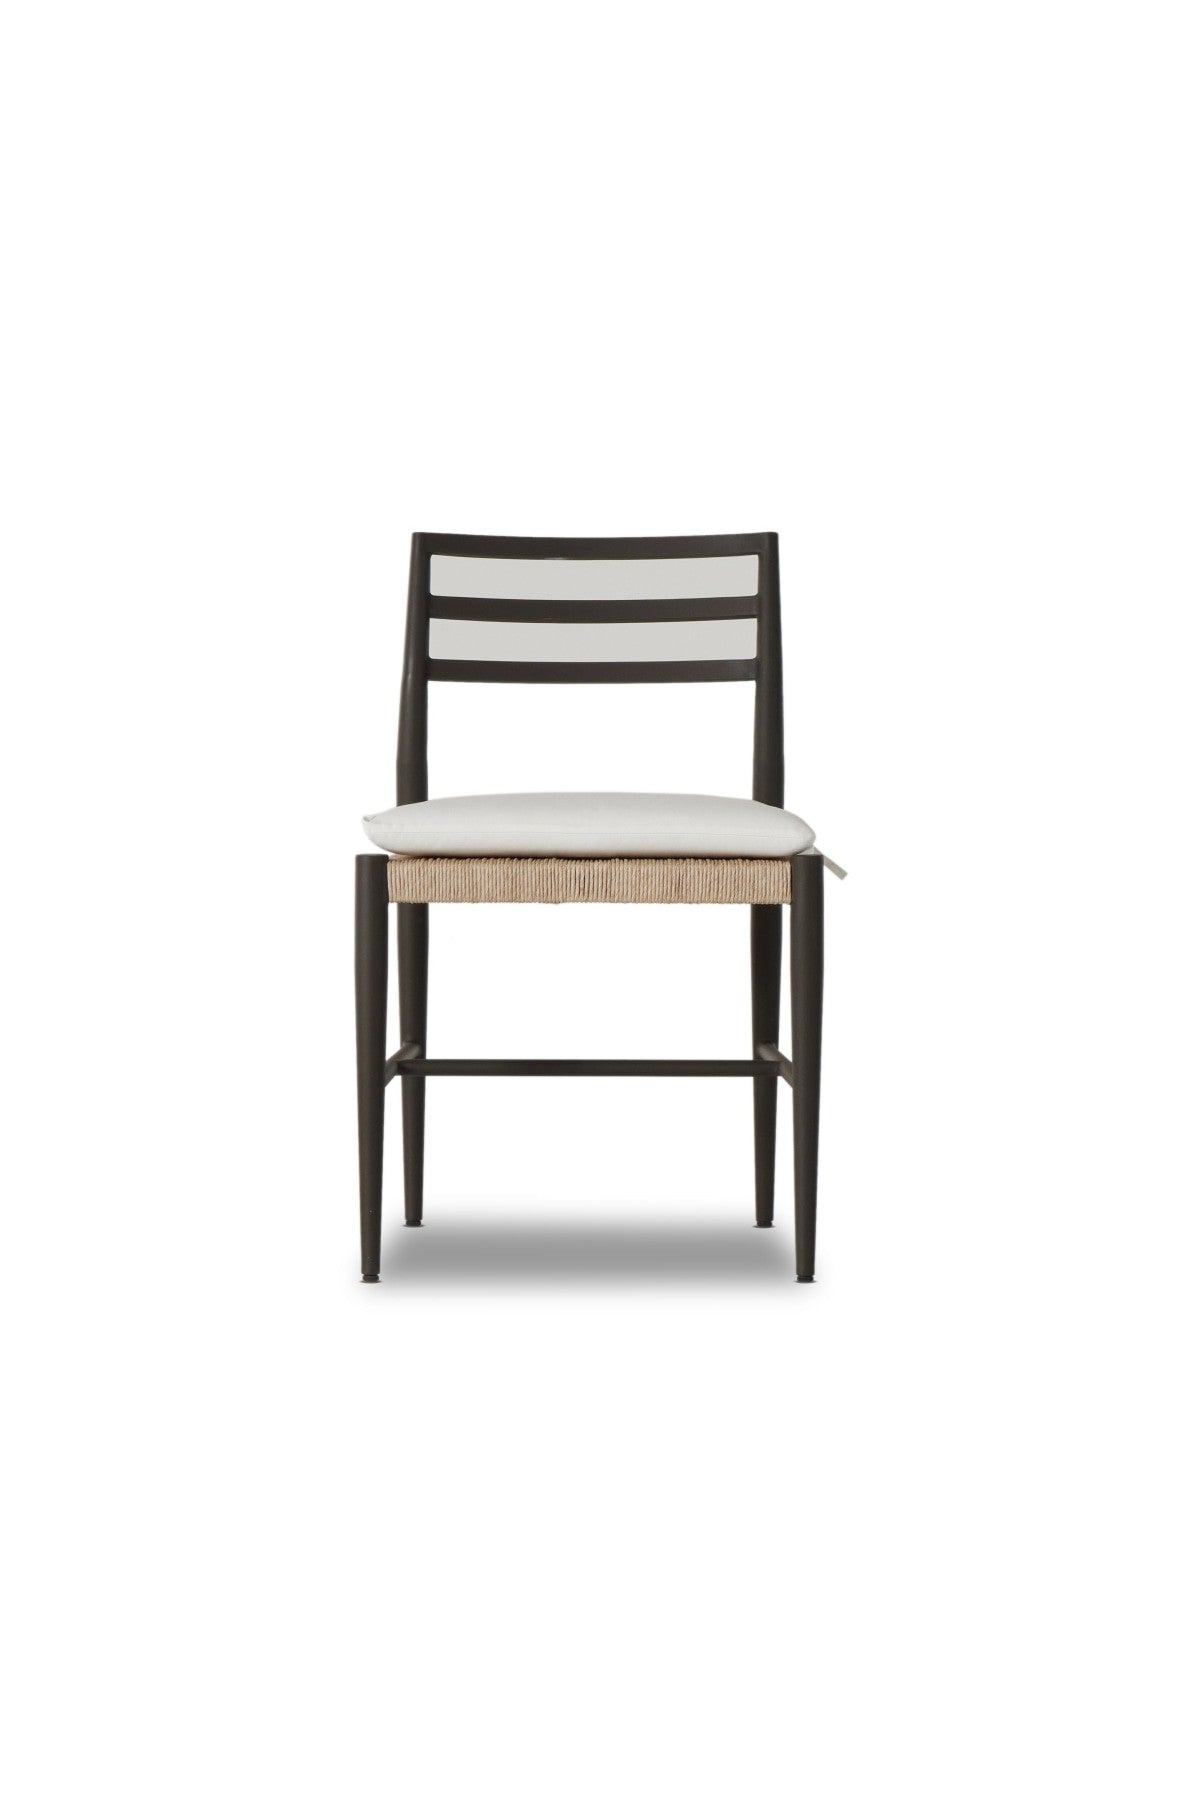 Glenny Outdoor Dining Chair